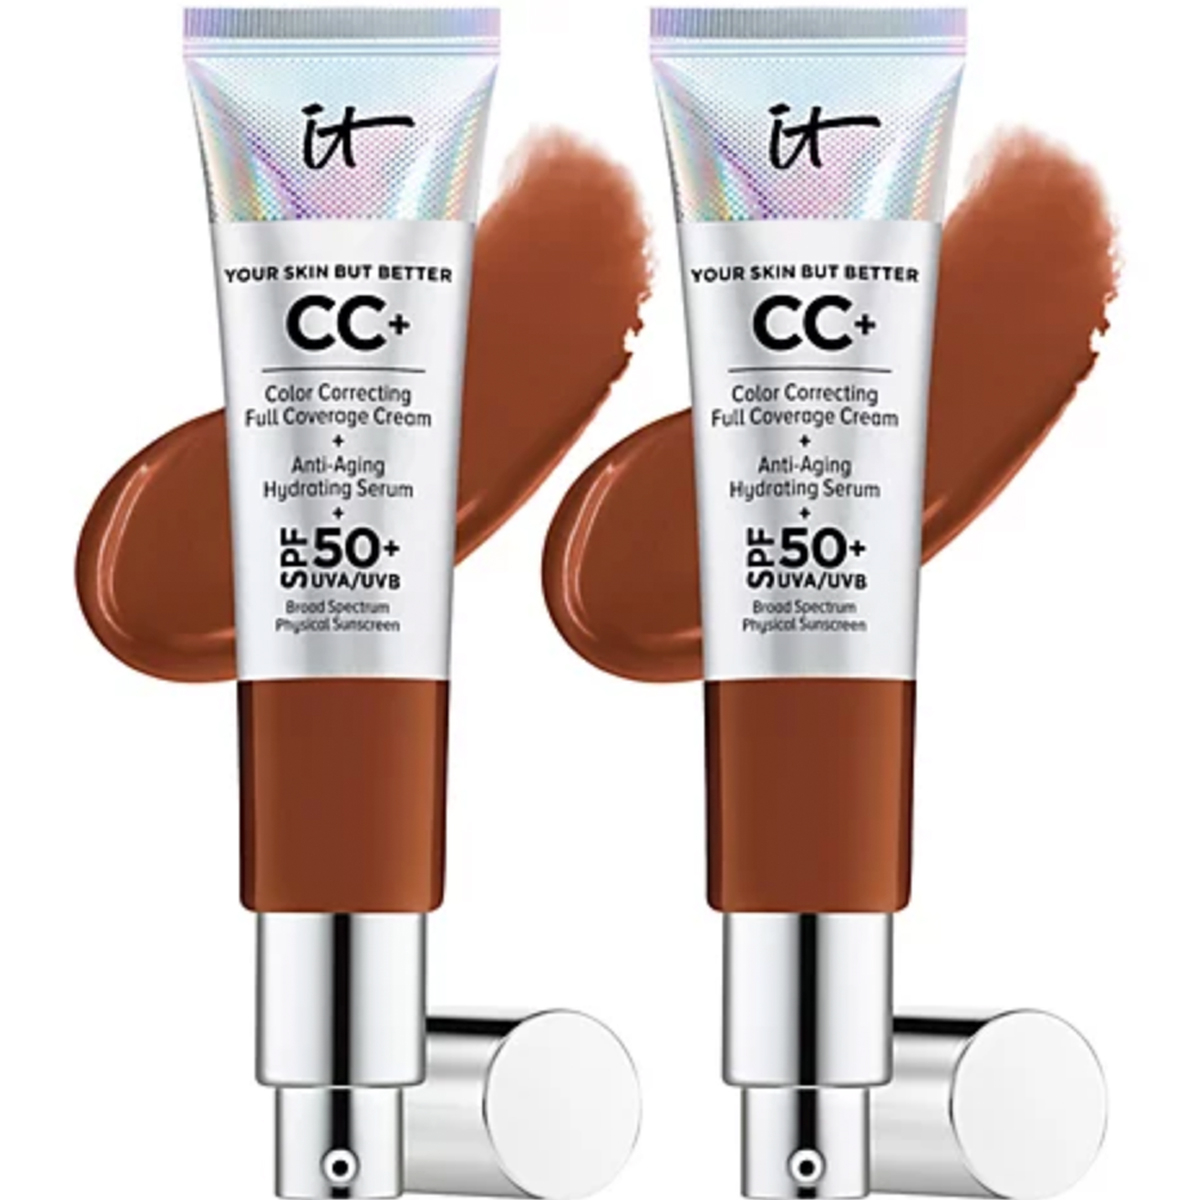 IS THIS IT Cosmetics CC+ full coverage cream SPF50 A MUST HAVE?